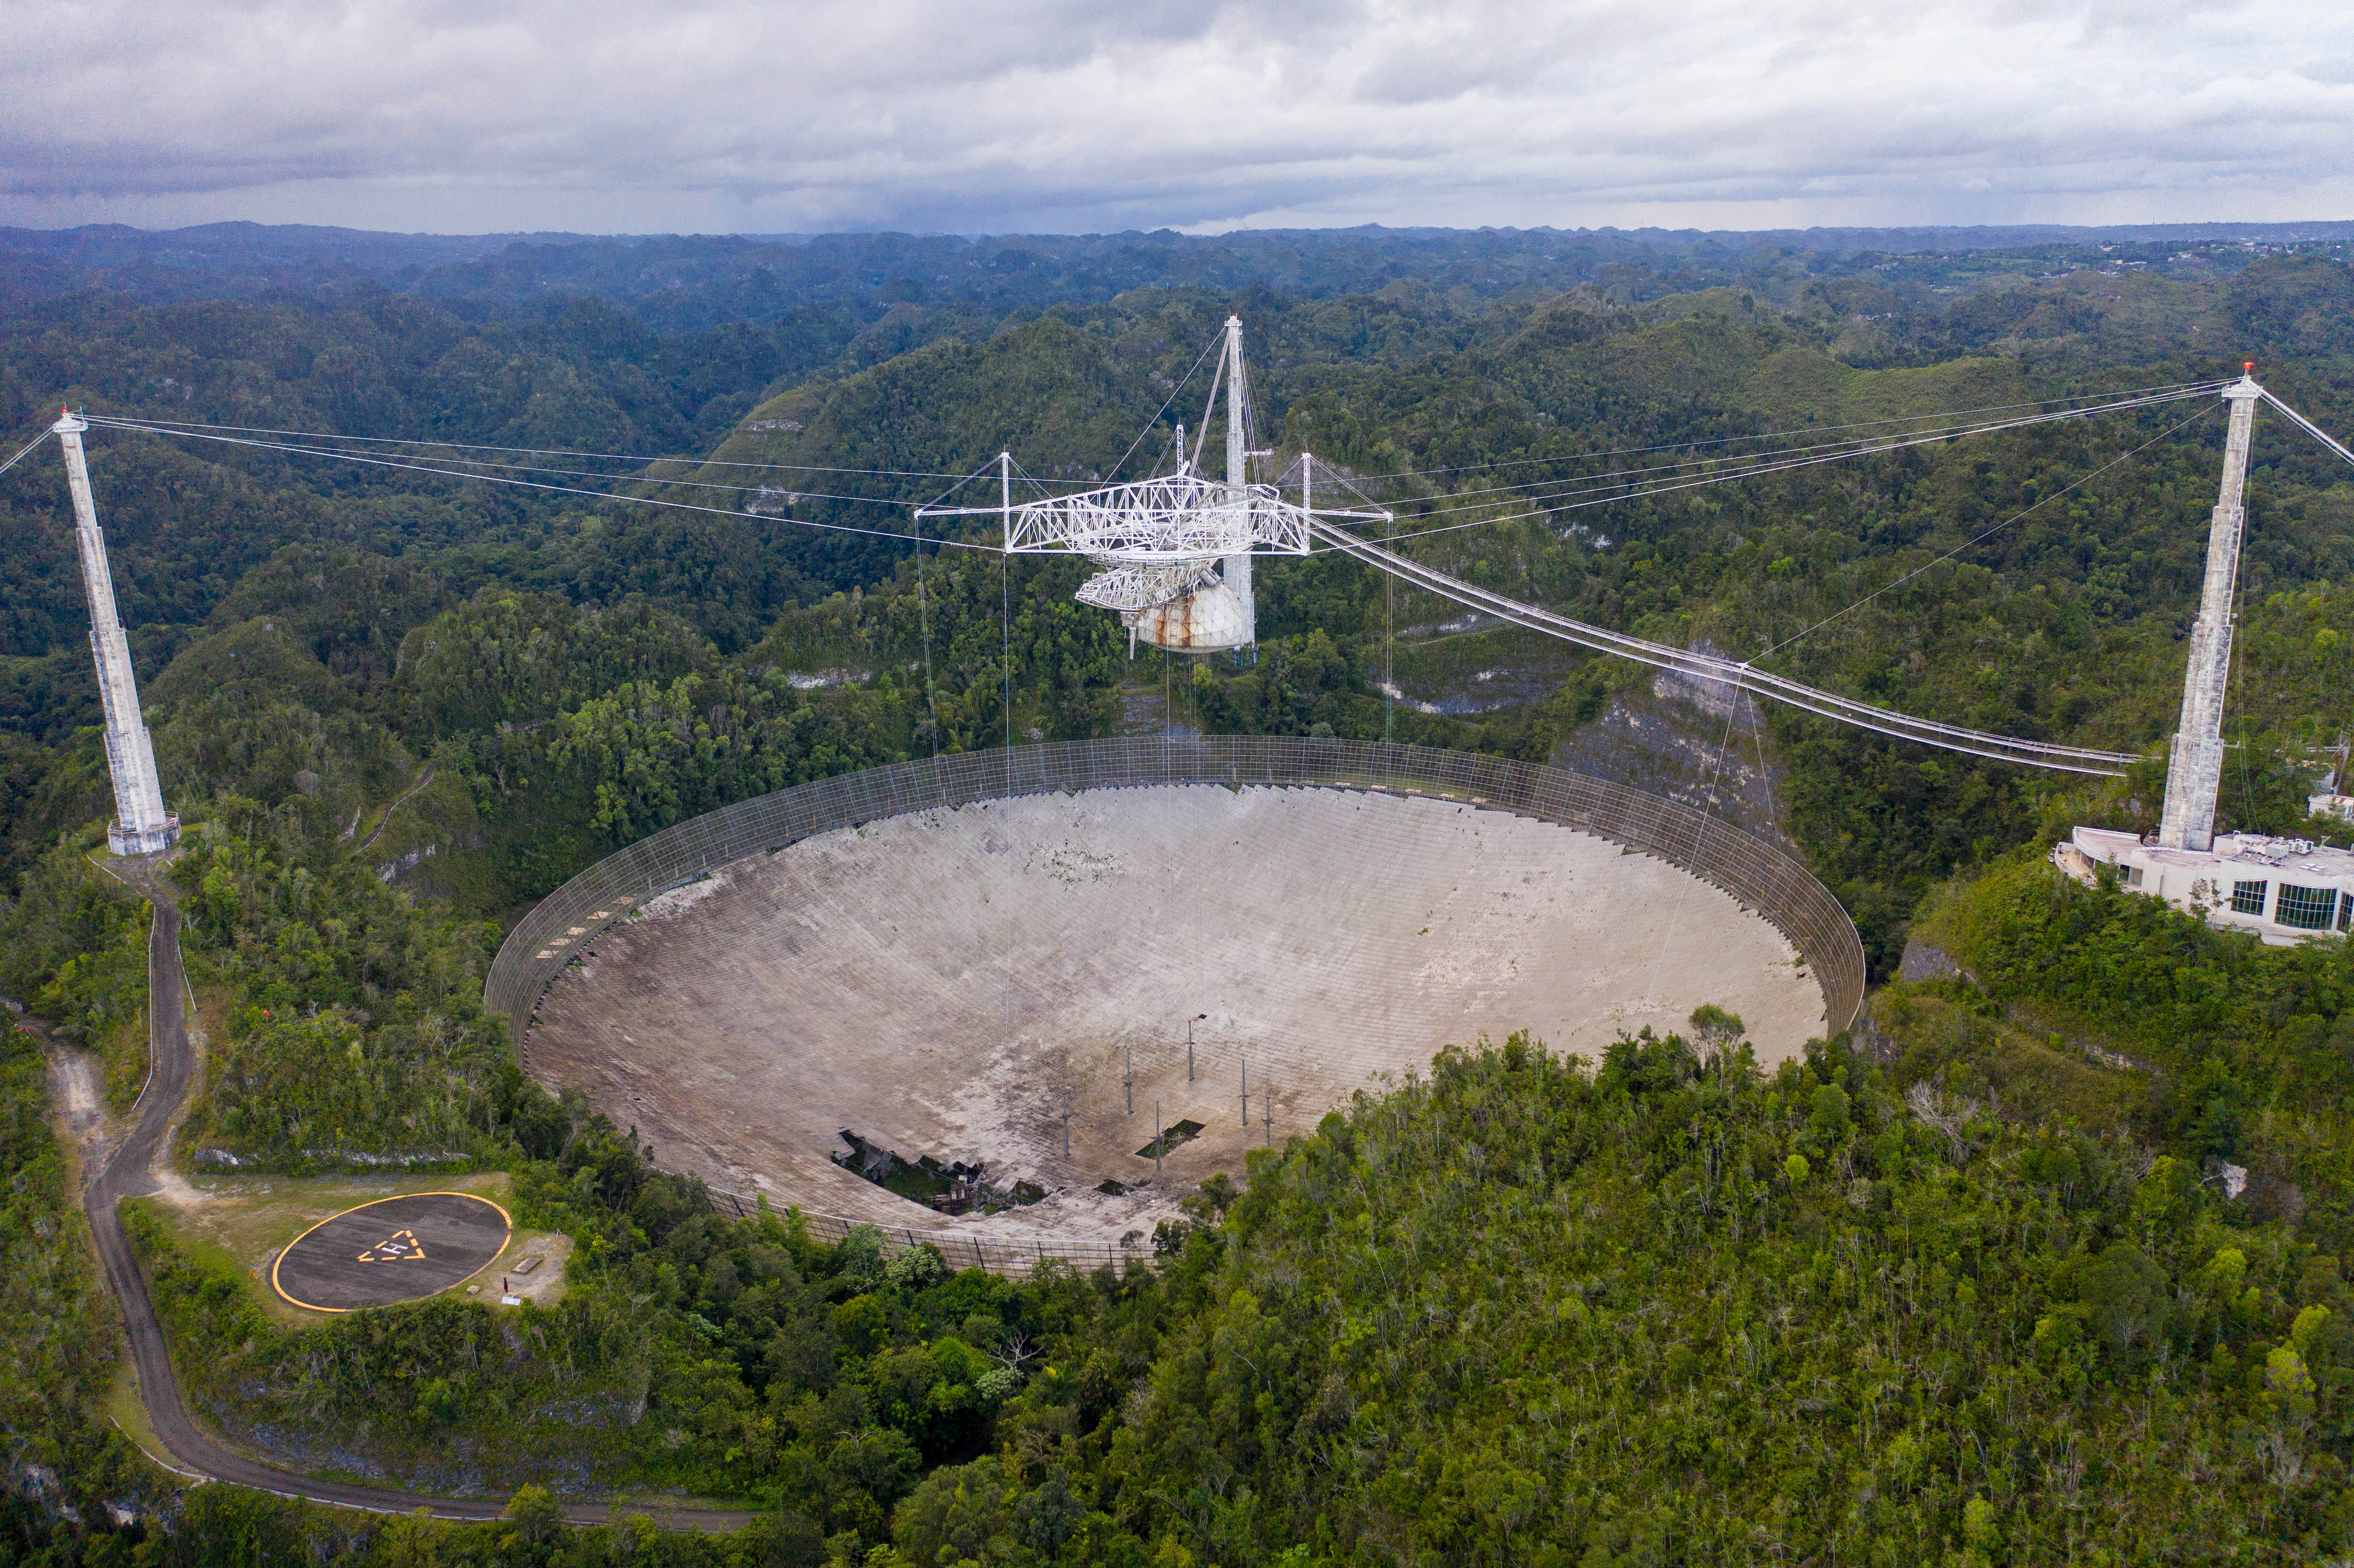 The radio antenna of the Arecibo Observatory in Arecibo, Puerto Rico, which was damaged by a hurricane in 2020.